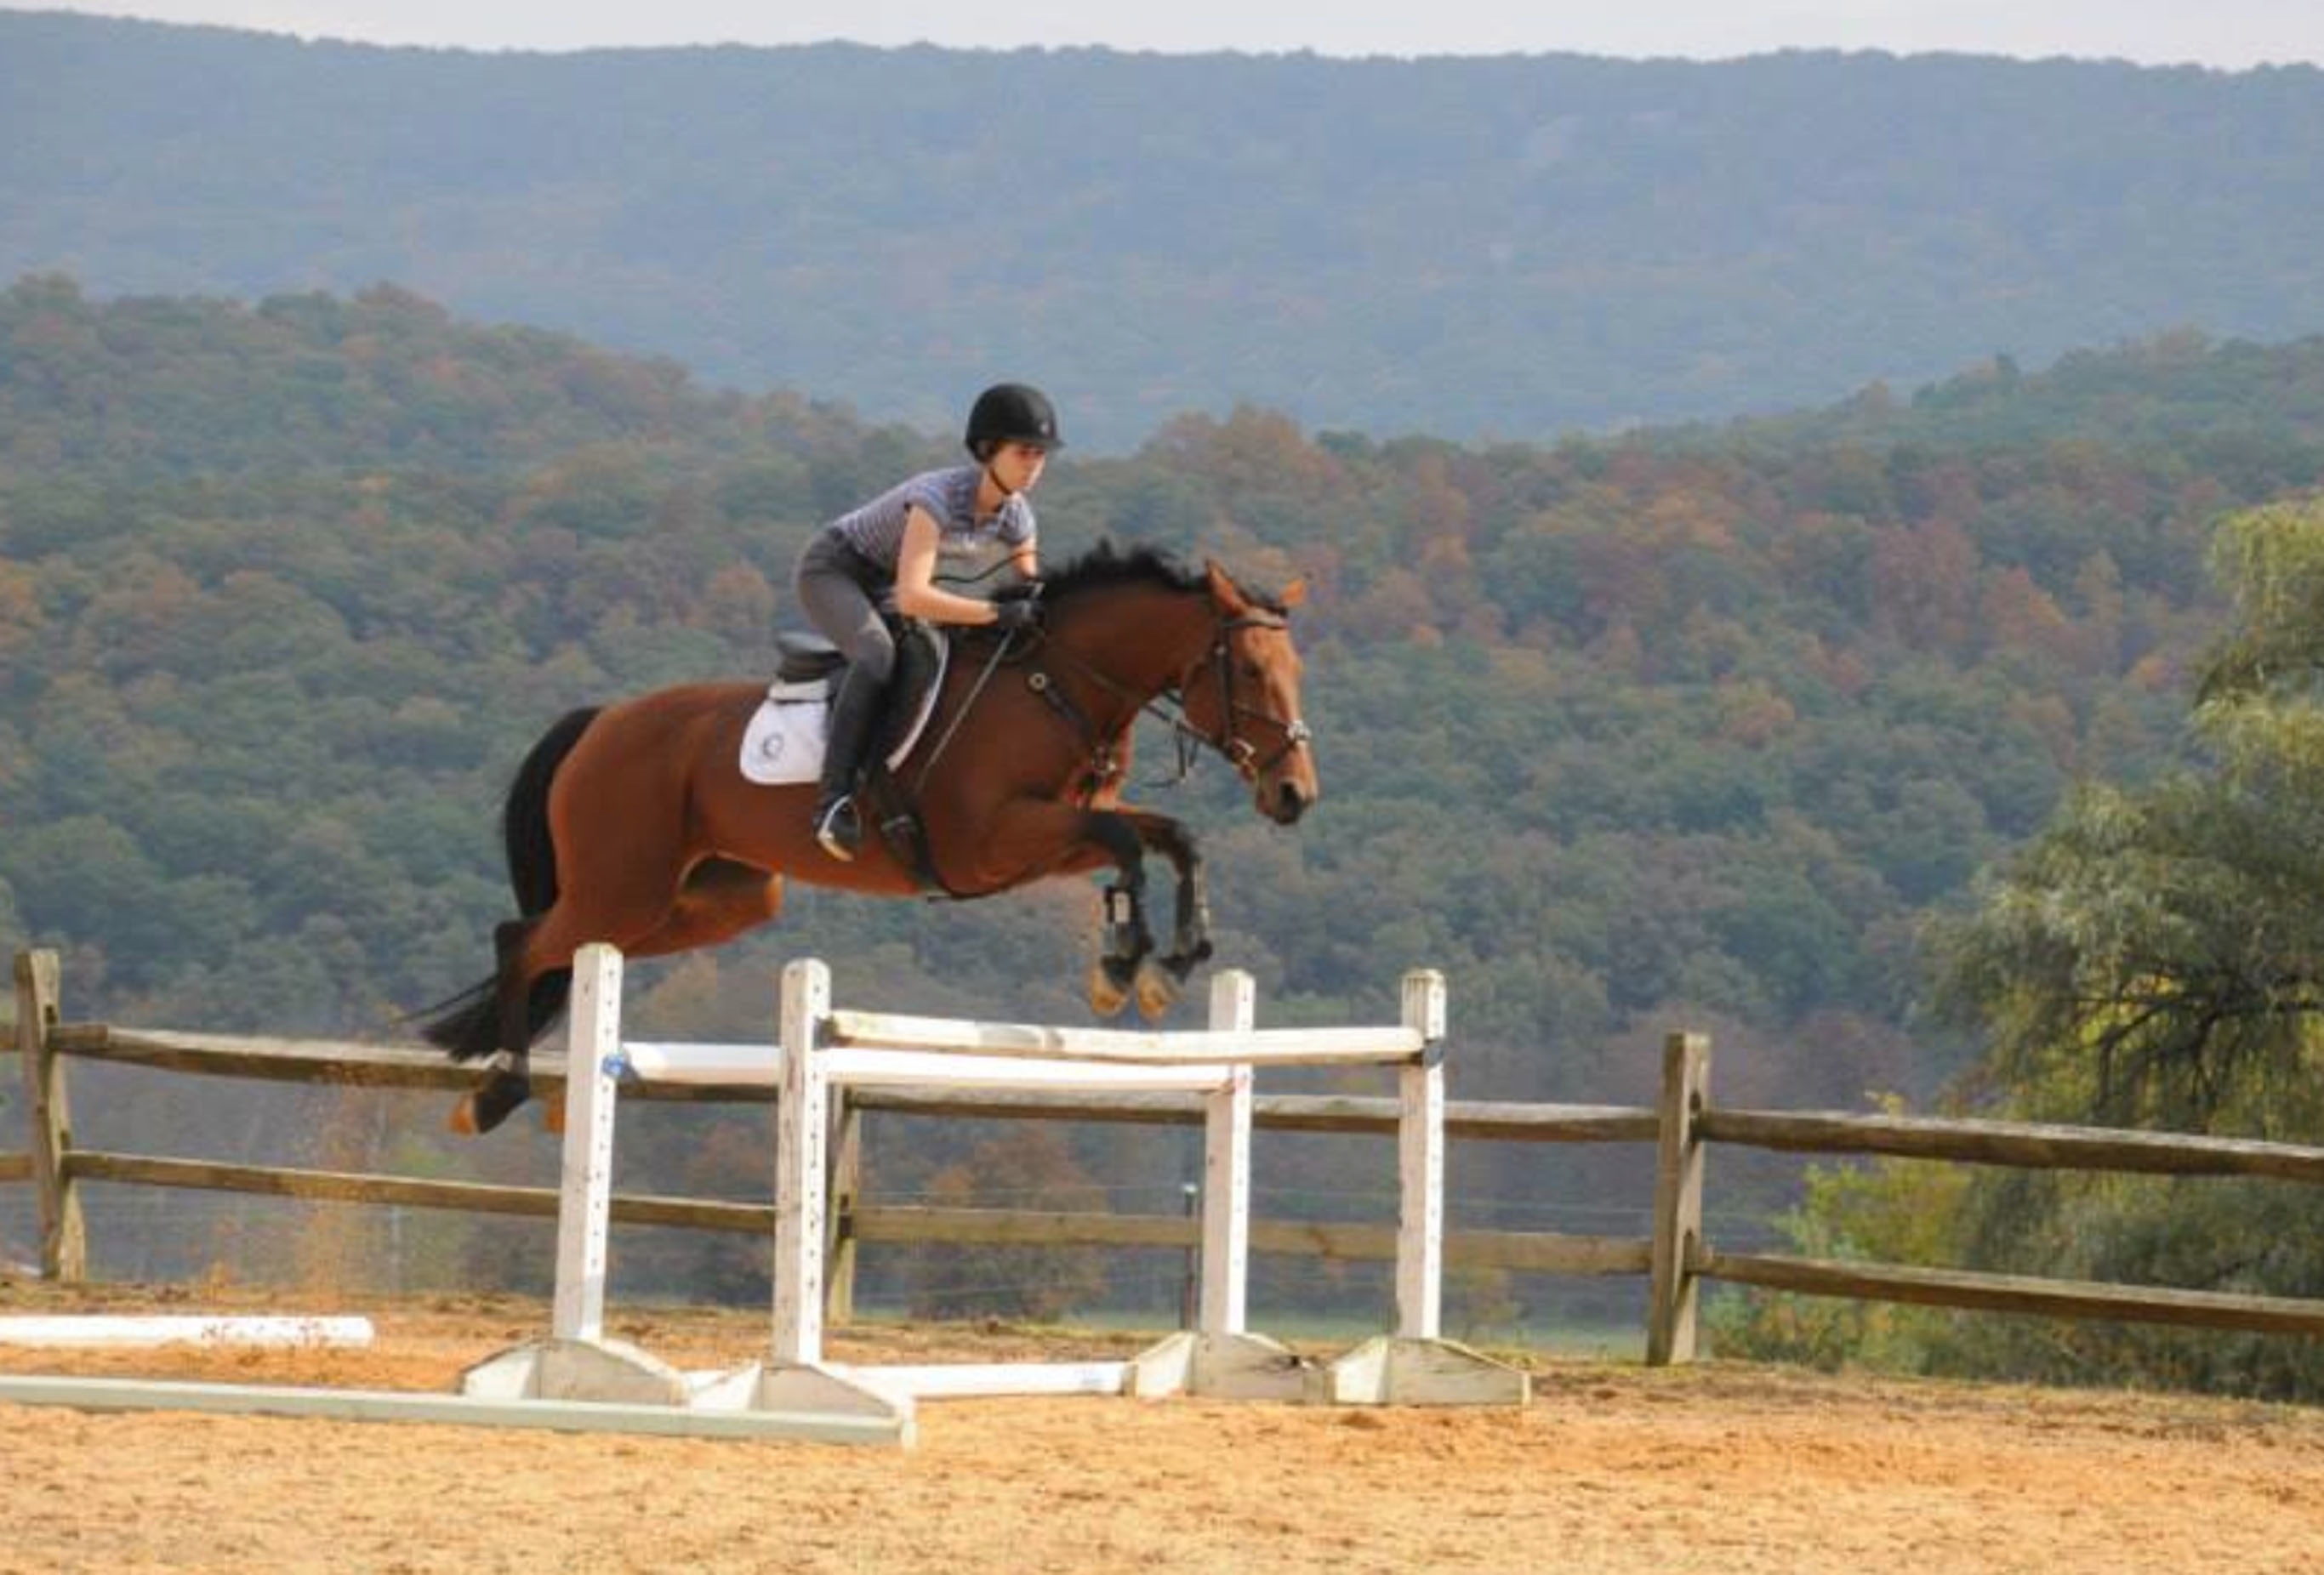 Gillian and her horse Punky sail over a jump. (Photo courtesy of Sue Cavanaugh)